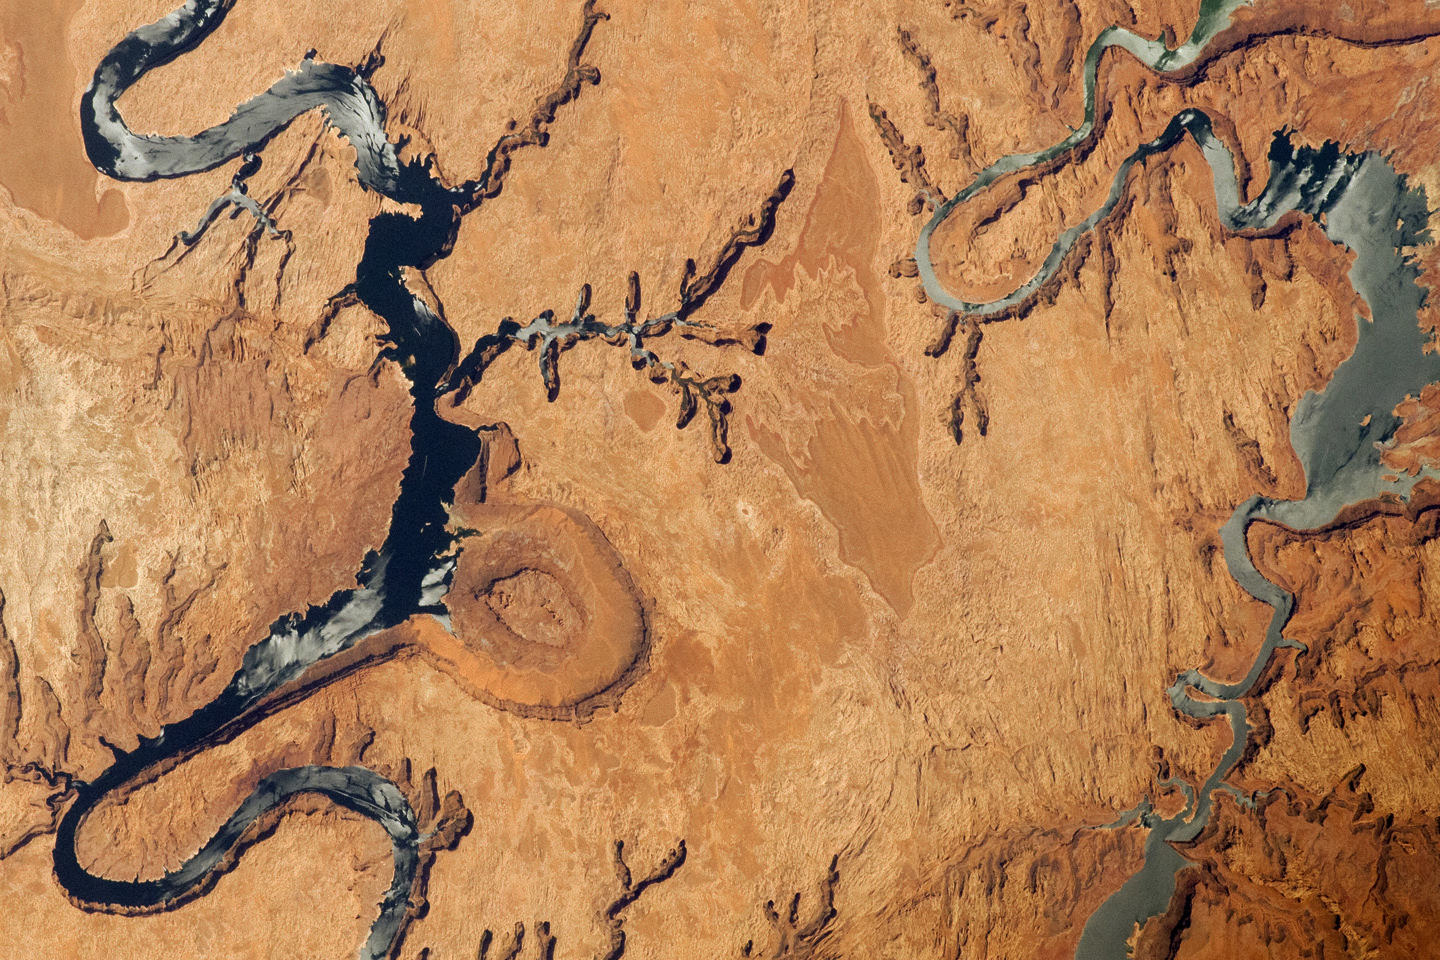 Astronaut-taken photograph of two long branches of Lake Powell, which extends across southeastern Utah and northeastern Arizona. The serpentine surface of the reservoir is highlighted by gray regions of sunglint and follows the incised course of the canyon, surrounded by a tan landscape. The two branches of the lake are connected by a bend to the southwest which is cut off at the bottom of the photo.